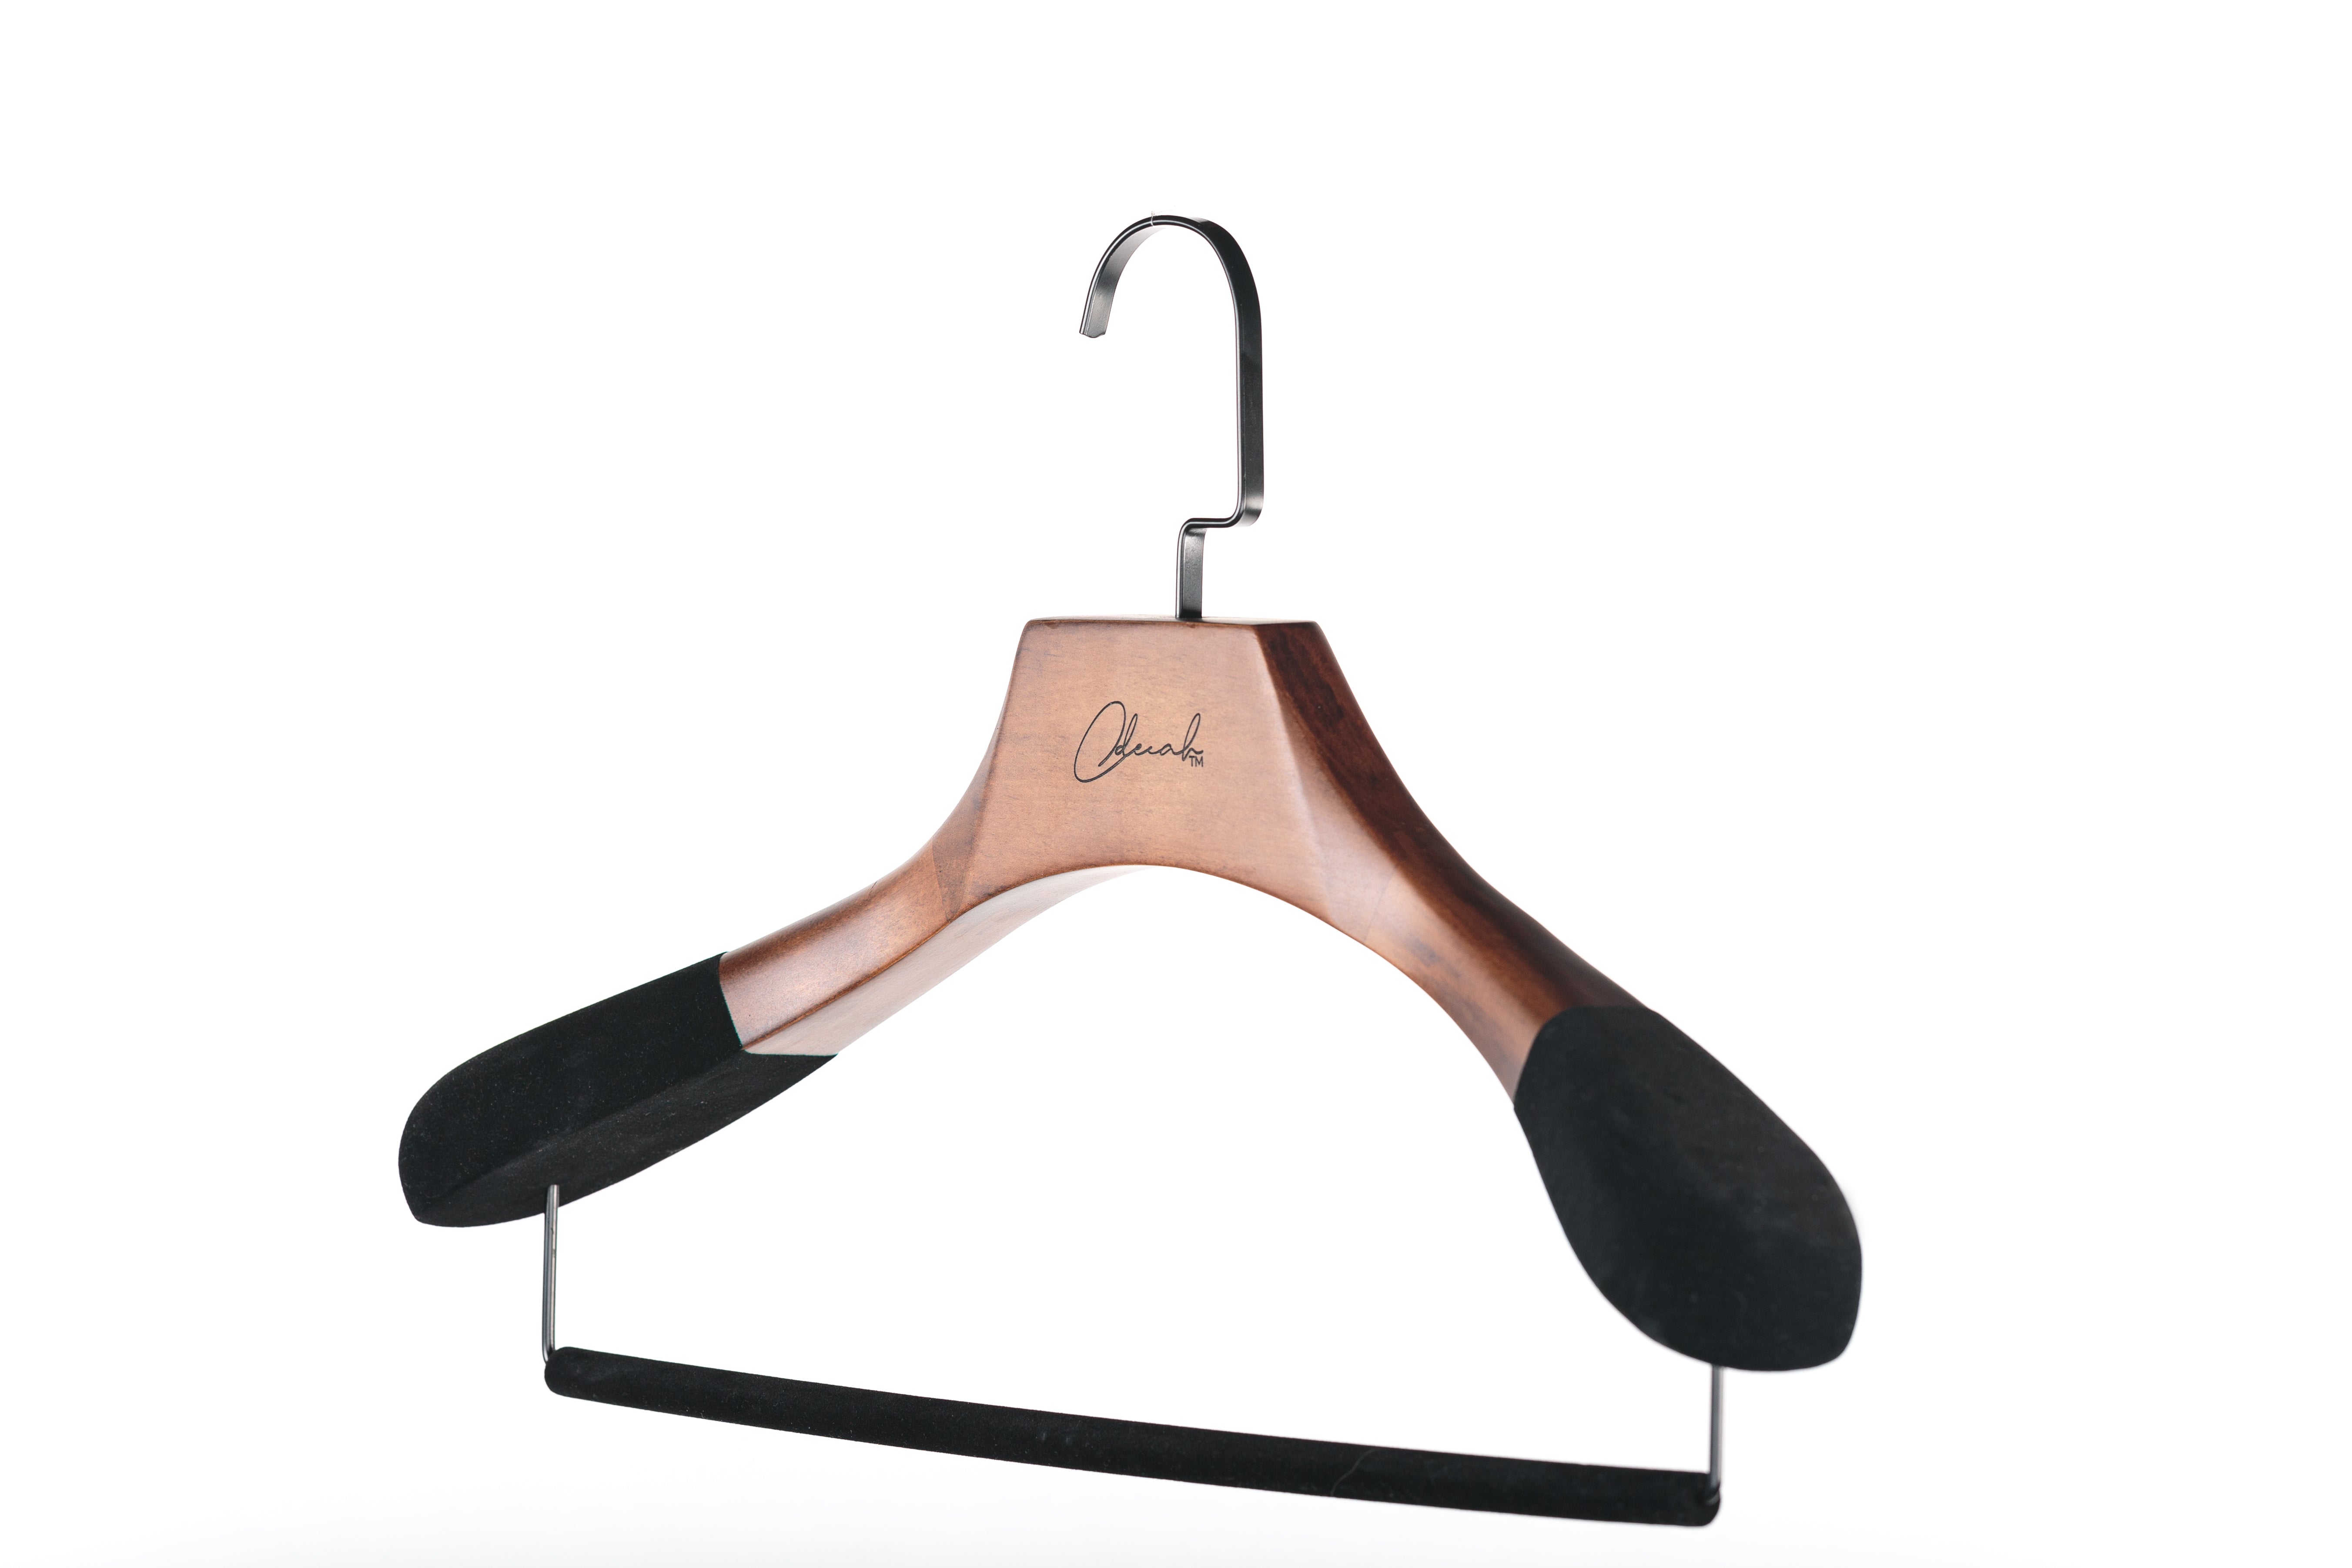 The Coat Hanger (2 or 4 or 6) – redrO